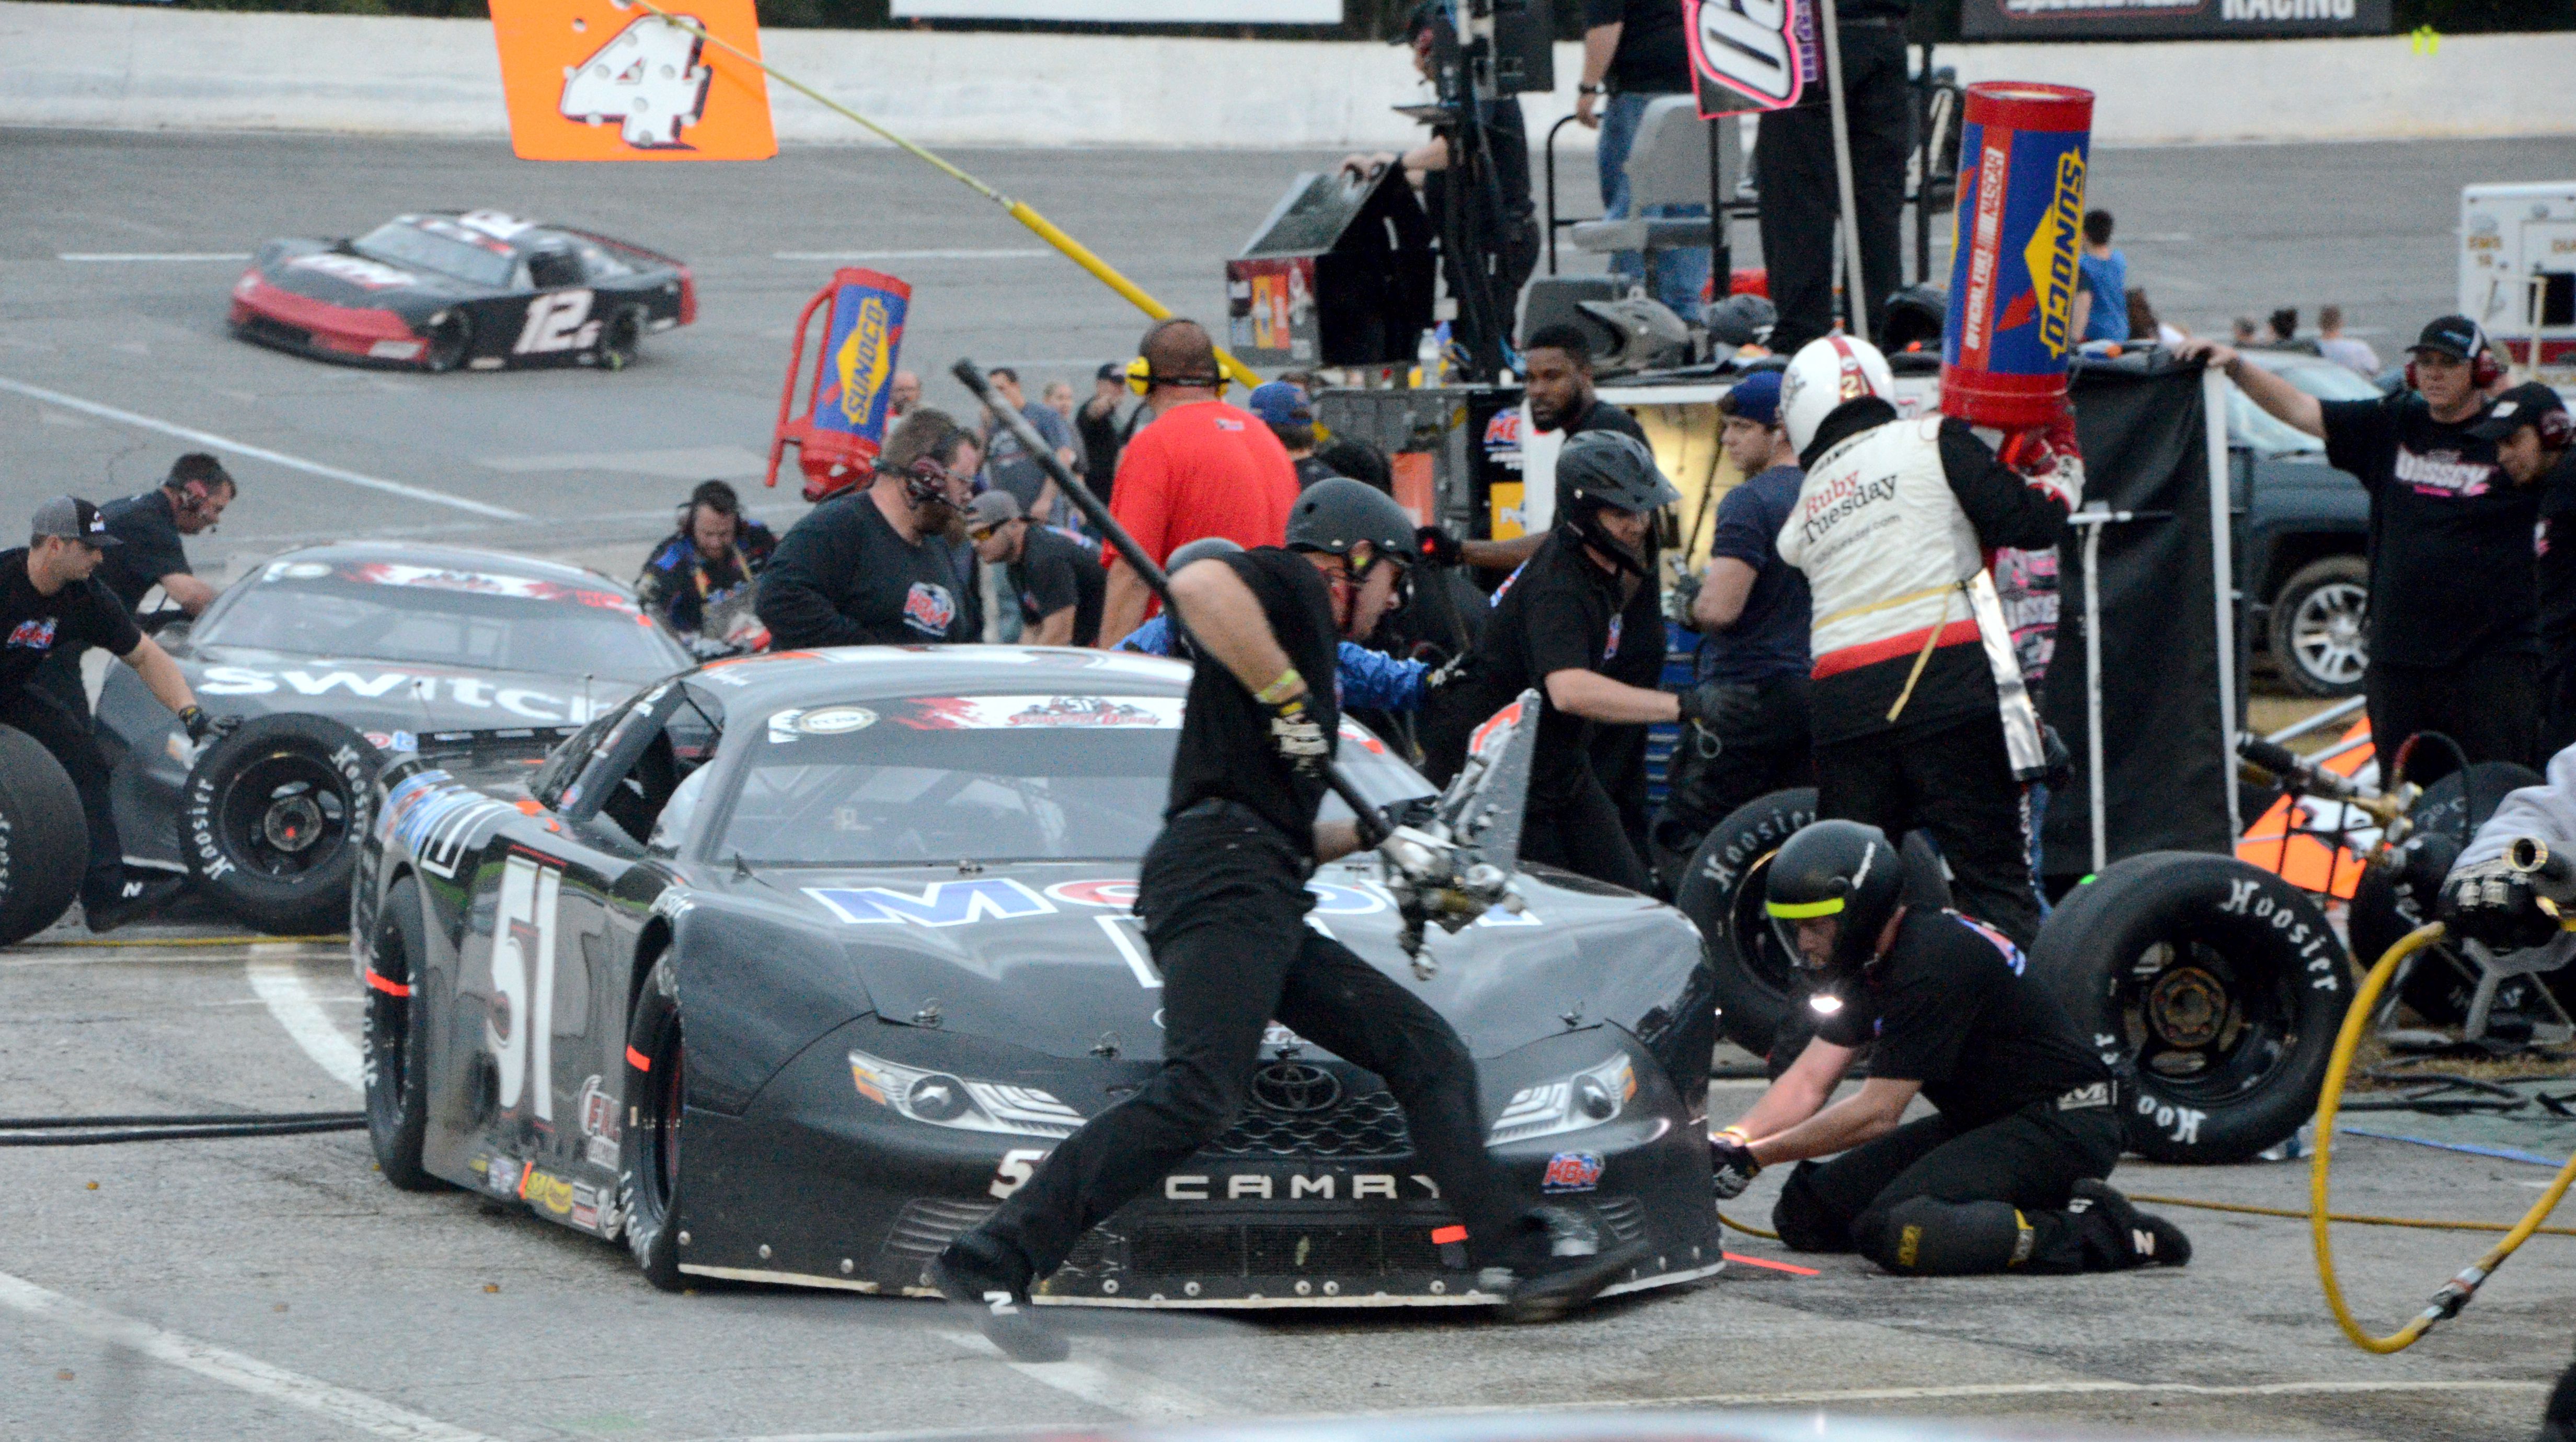 THOUGHTS: Live Pit Stops Gone for 52nd Snowball Derby in a Needed but Bittersweet Change